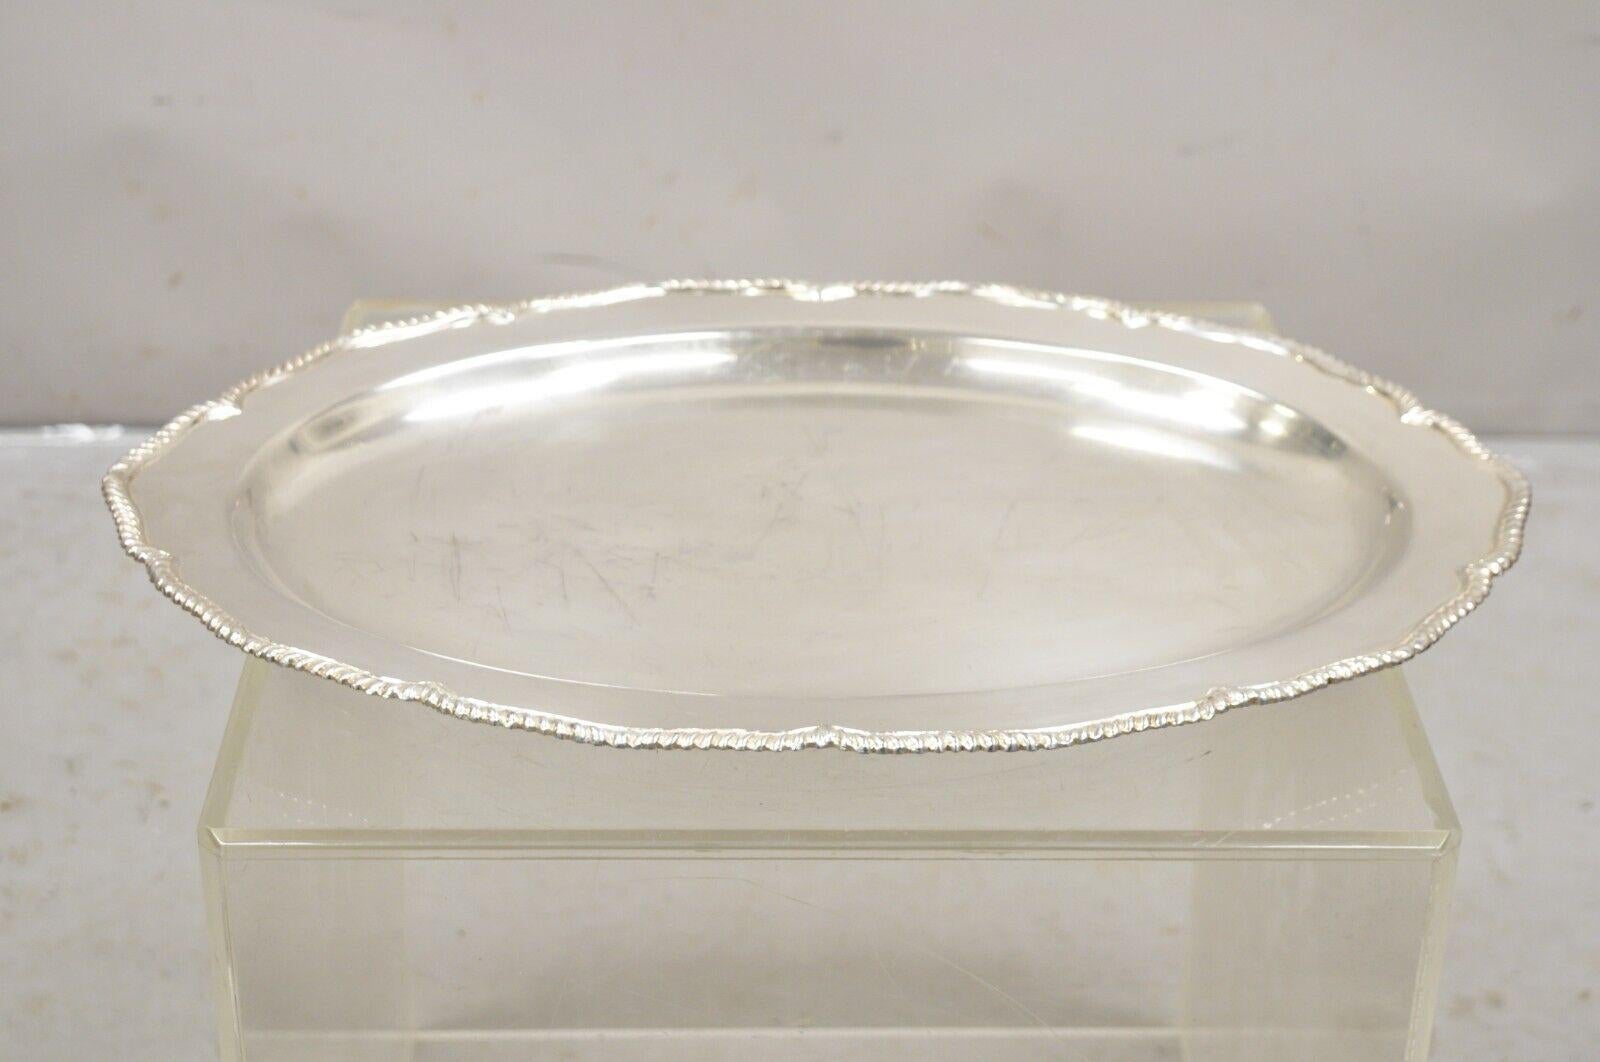 Vintage English Regency Silver Plated Oval Modernist Serving Platter Tray. Circa Mid 20th Century. Measurements:  1